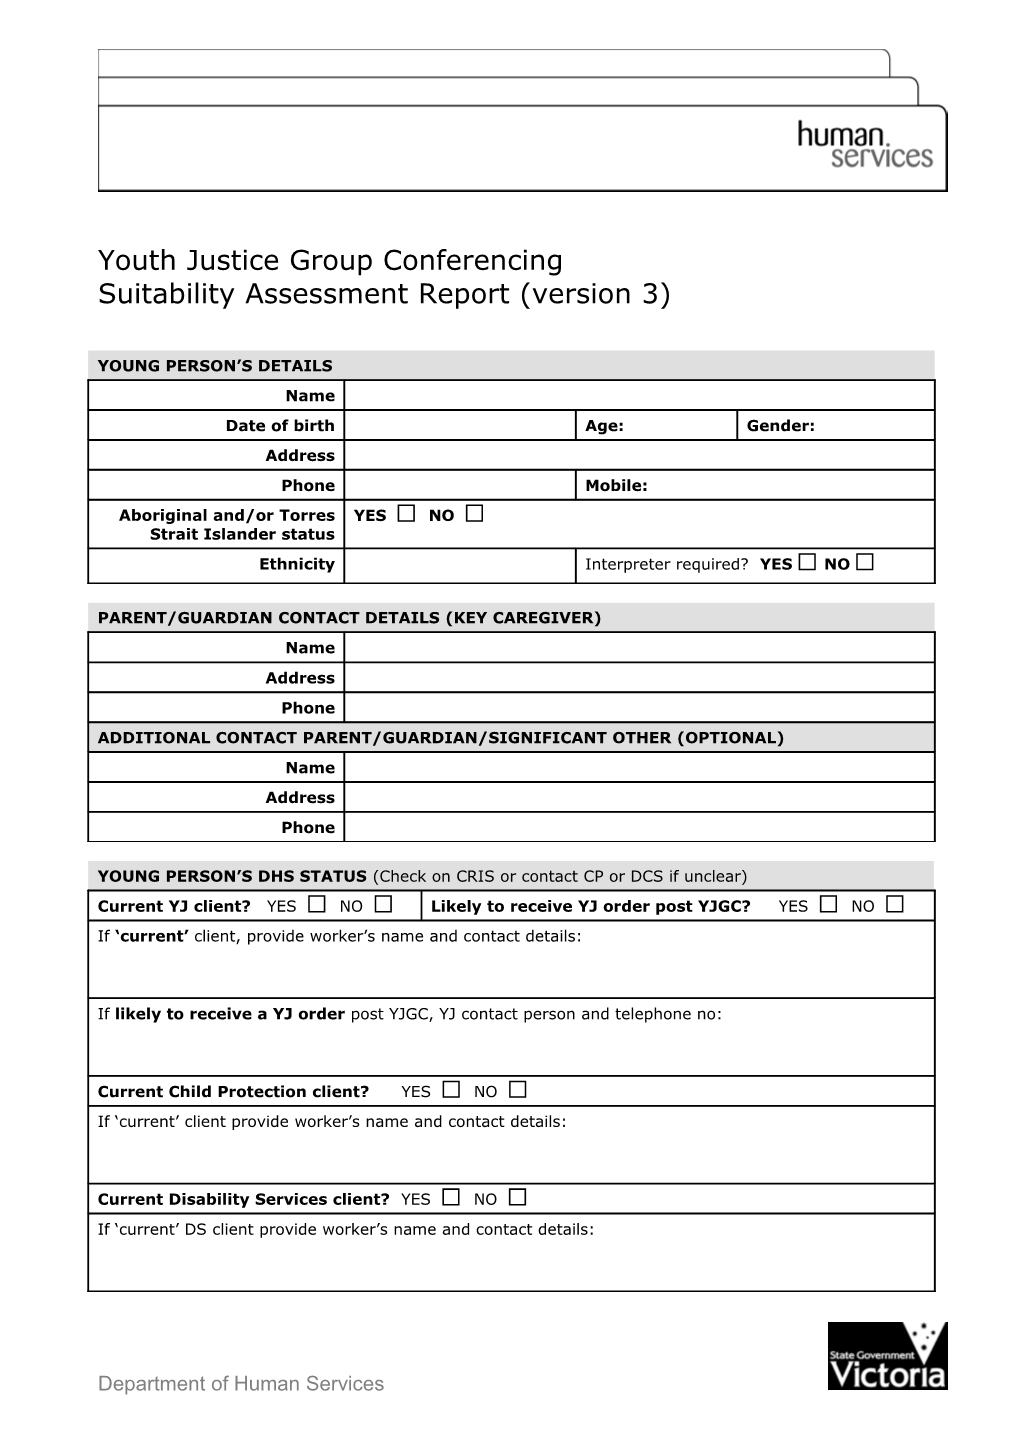 Youth Justice Group Conferencing Suitabilility Assessment Report (Version 3)